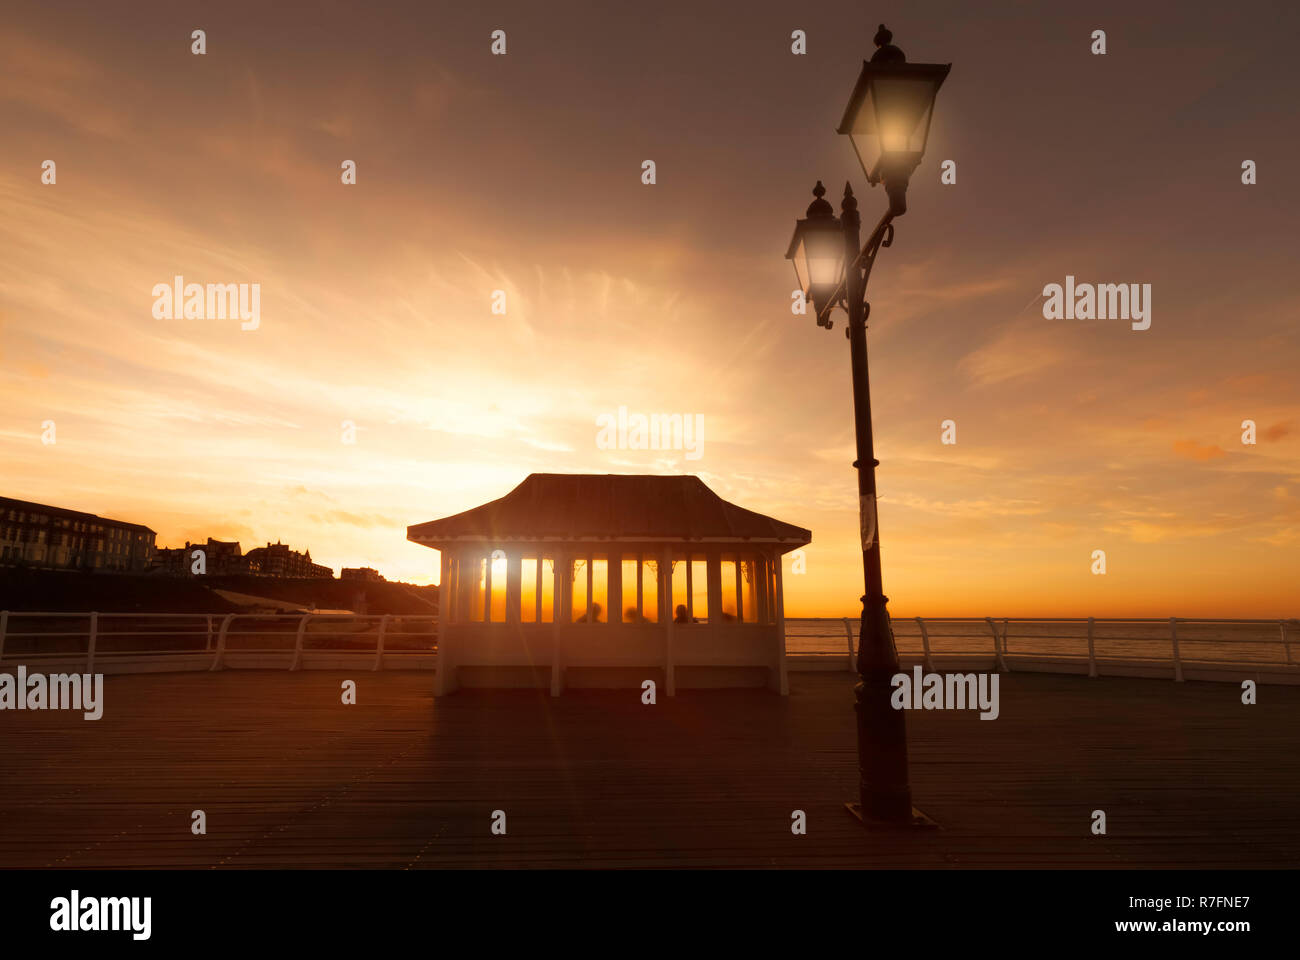 Historic victorian pier shelter at sunset with people in silhouette sat watching the orange glowing sun setting behand the horizon. Old lamp post give Stock Photo